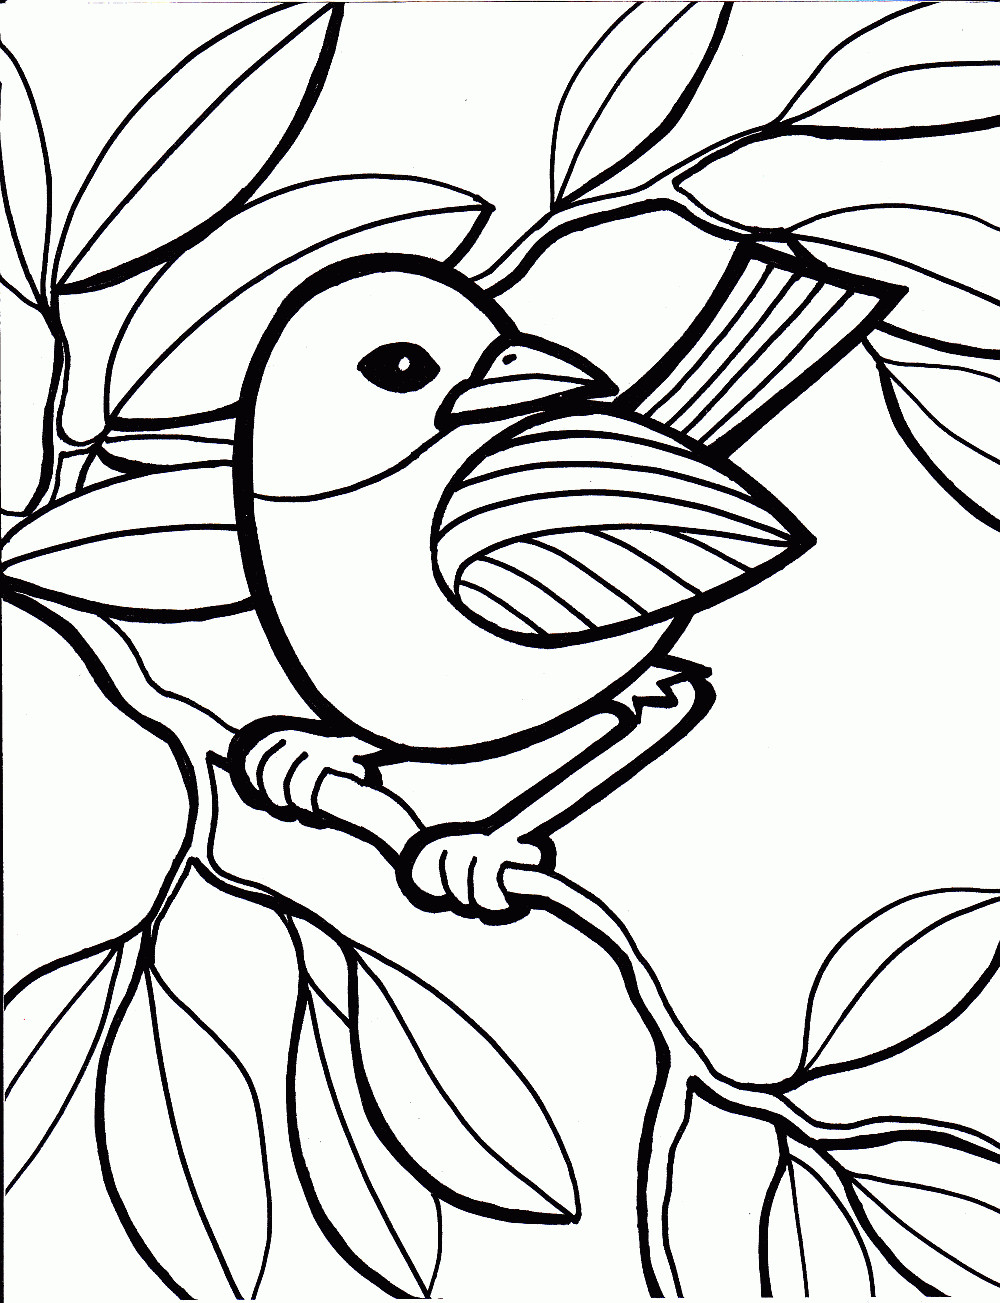 Online Coloring Pages For Girls
 Free Coloring Pages For Kids Top Profile